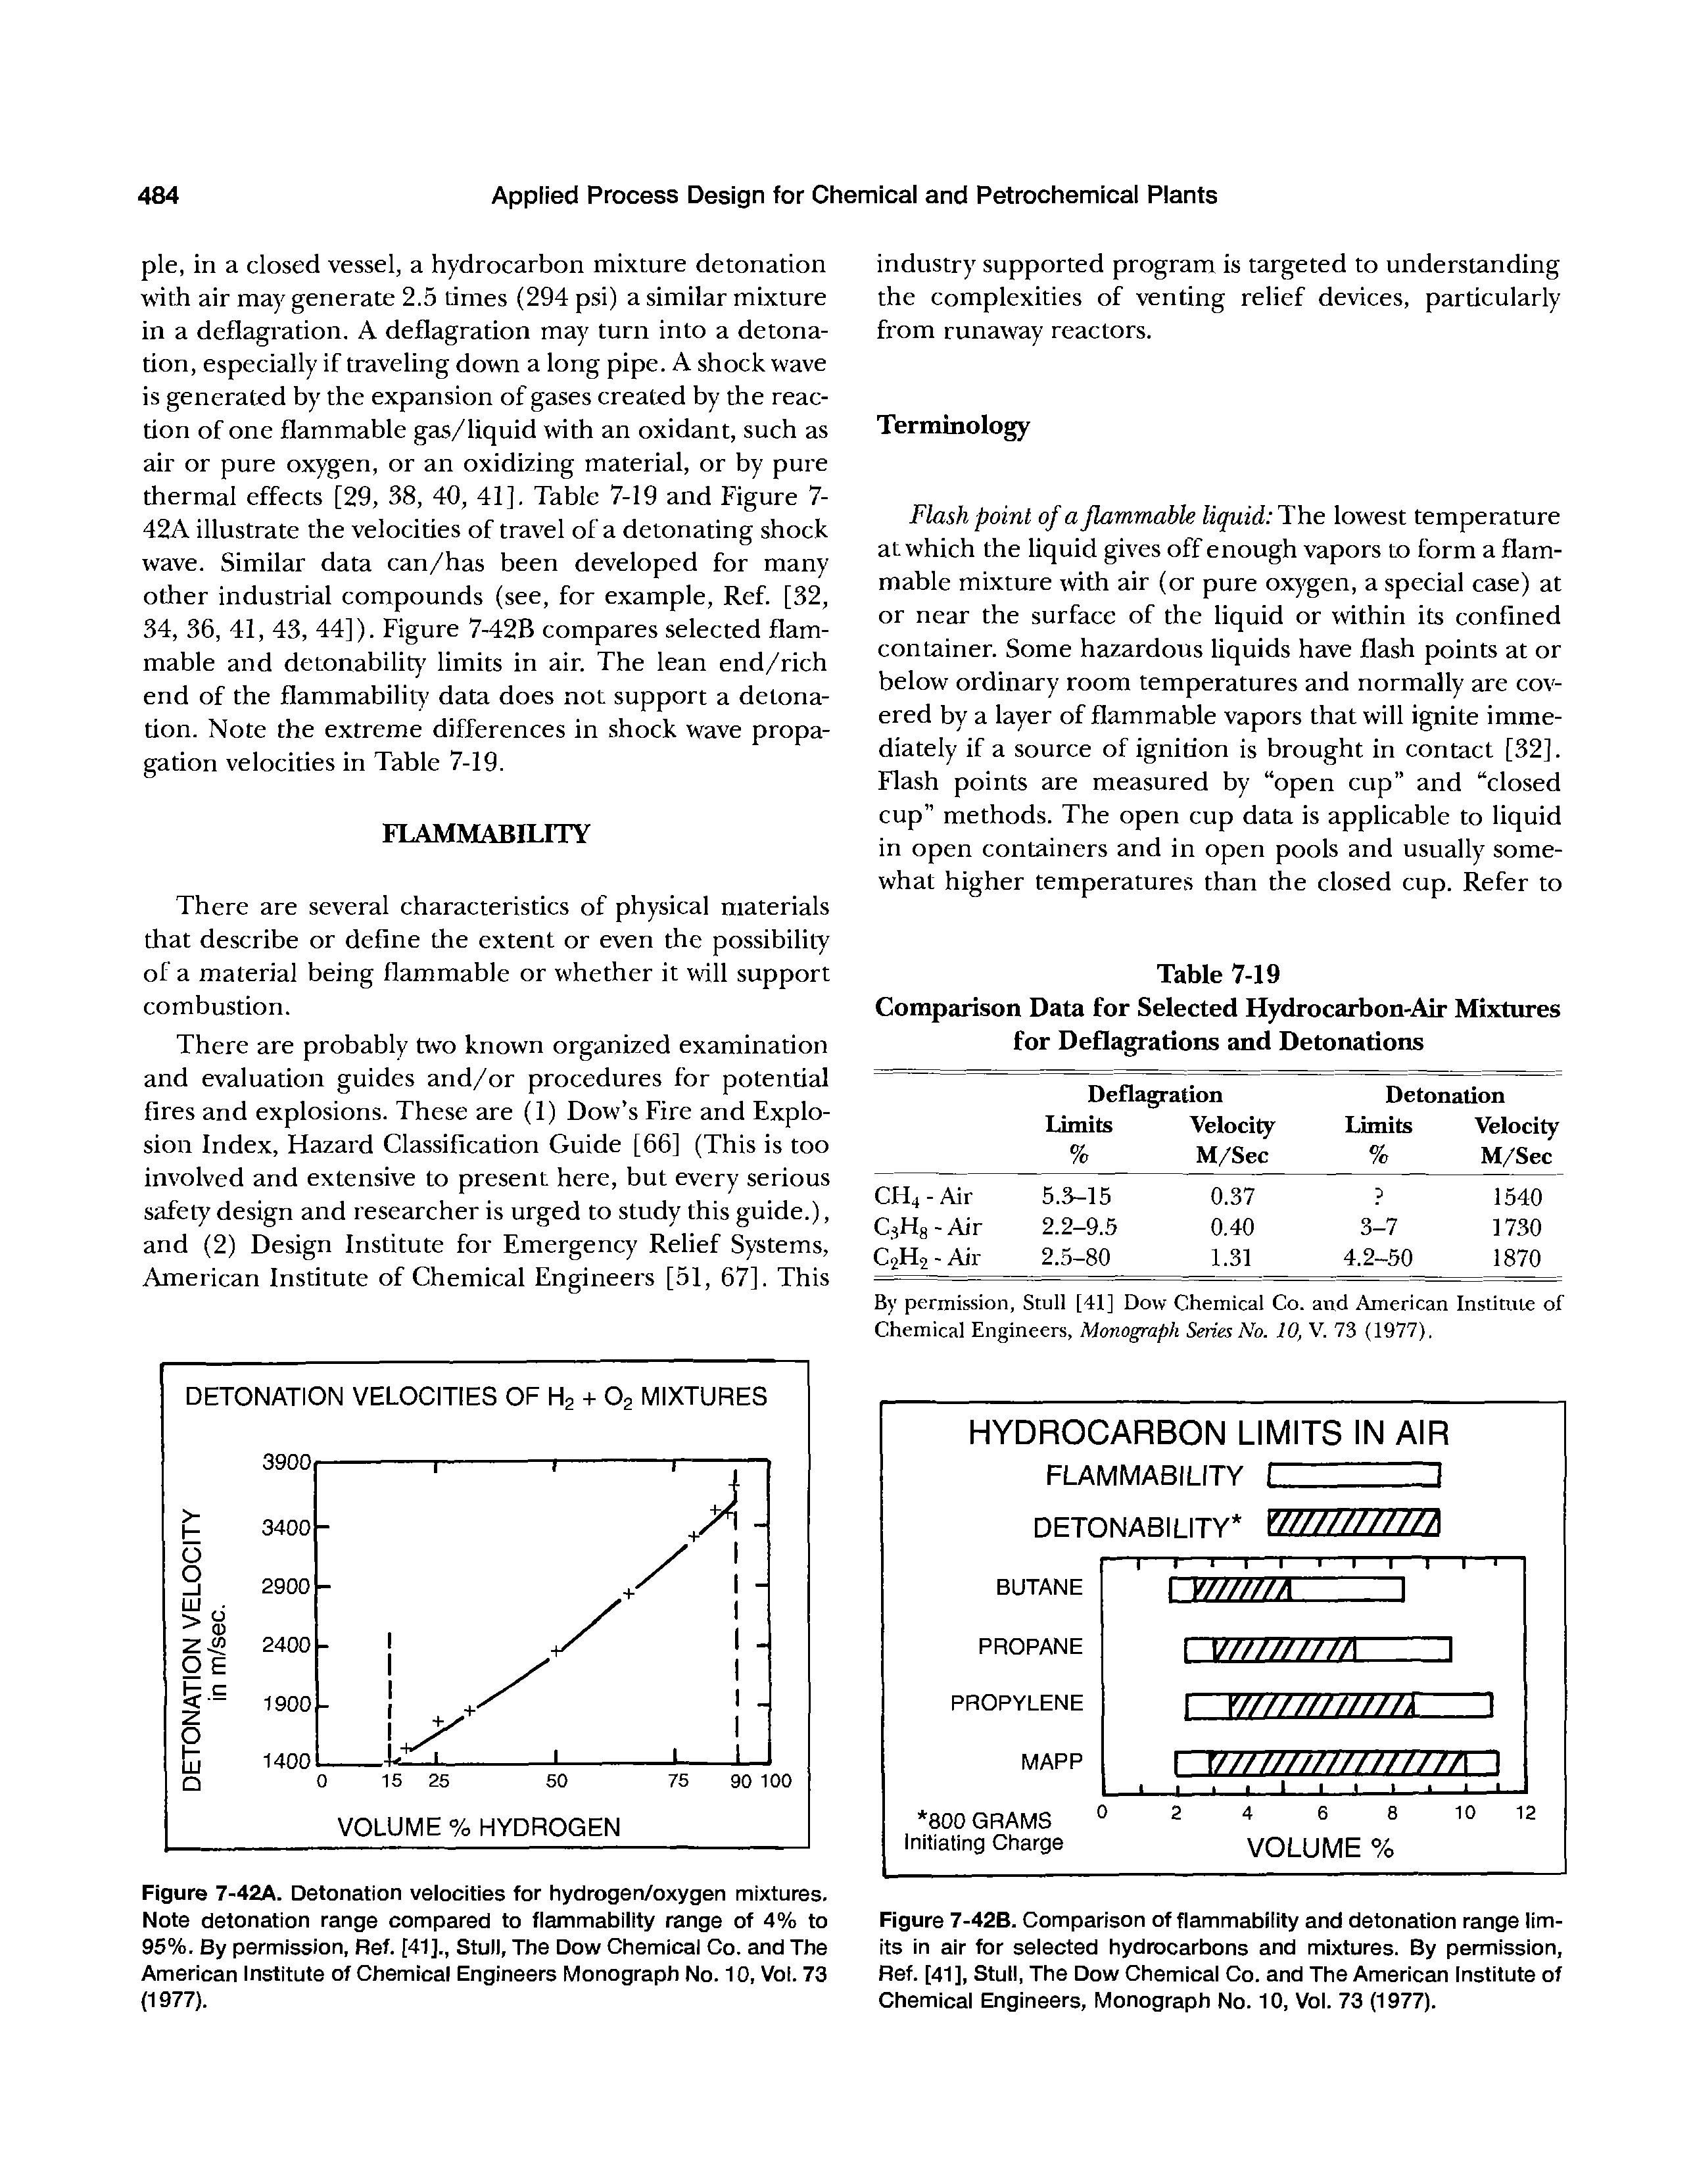 Figure 7-42A. Detonation velocities for hydrogen/oxygen mixtures. Note detonation range compared to flammability range of 4% to 95%. By permission. Ref. [41]., Stuii, The Dow Chemical Co. and The American Institute of Chemical Engineers Monograph No. 10, Vol. 73 (1977).